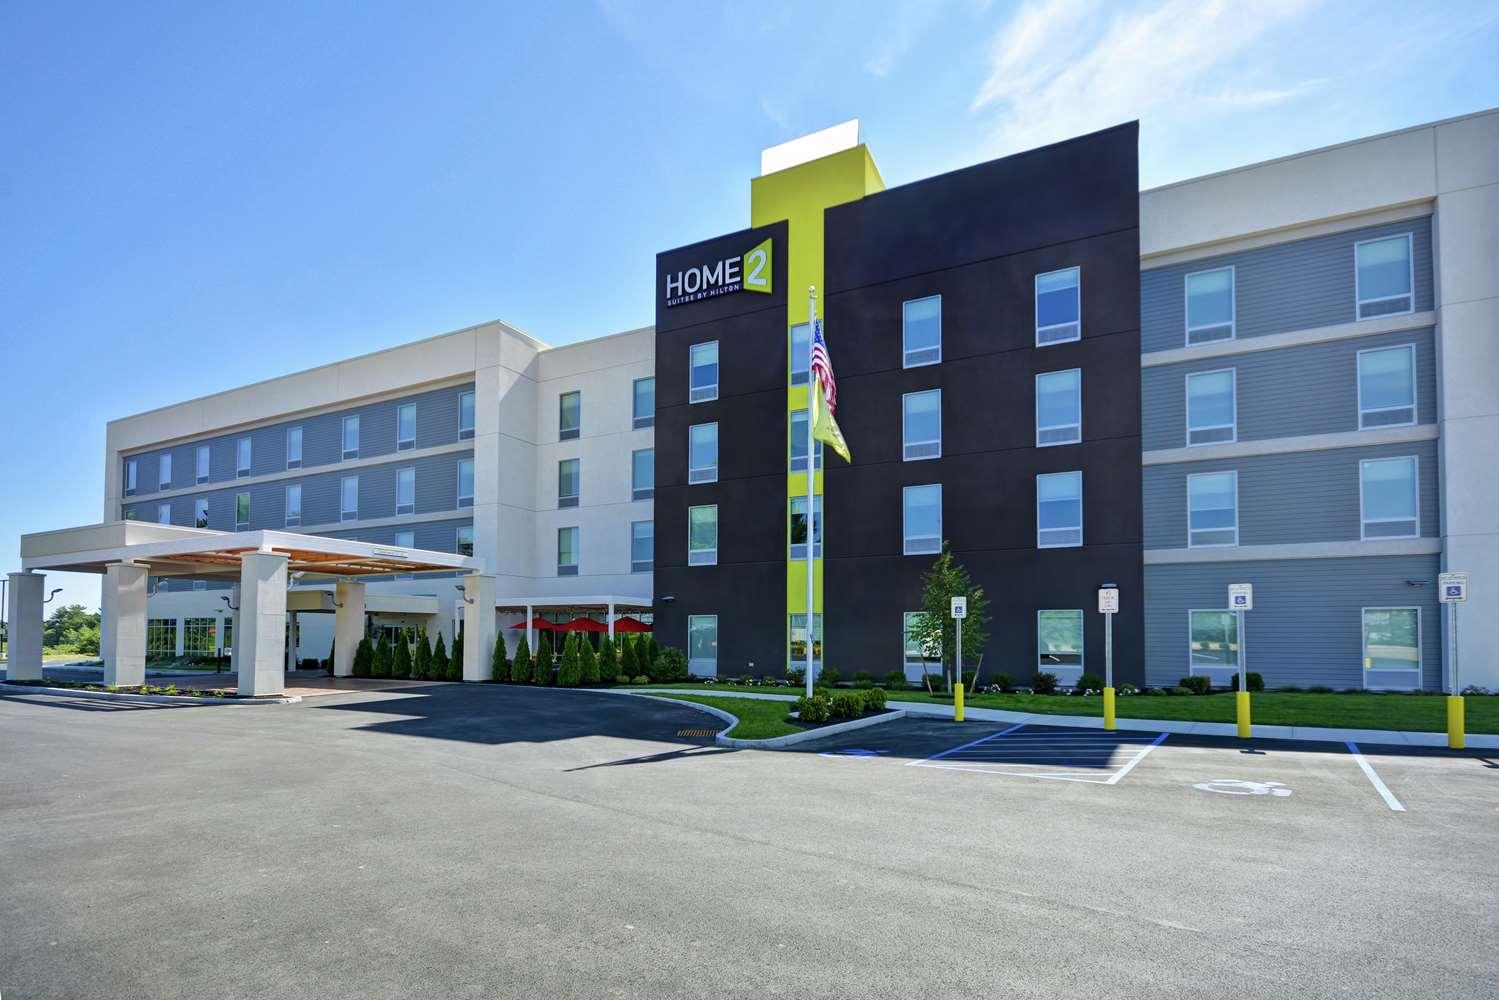 Home2 Suites by Hilton Queensbury Lake George in Queensbury, NY